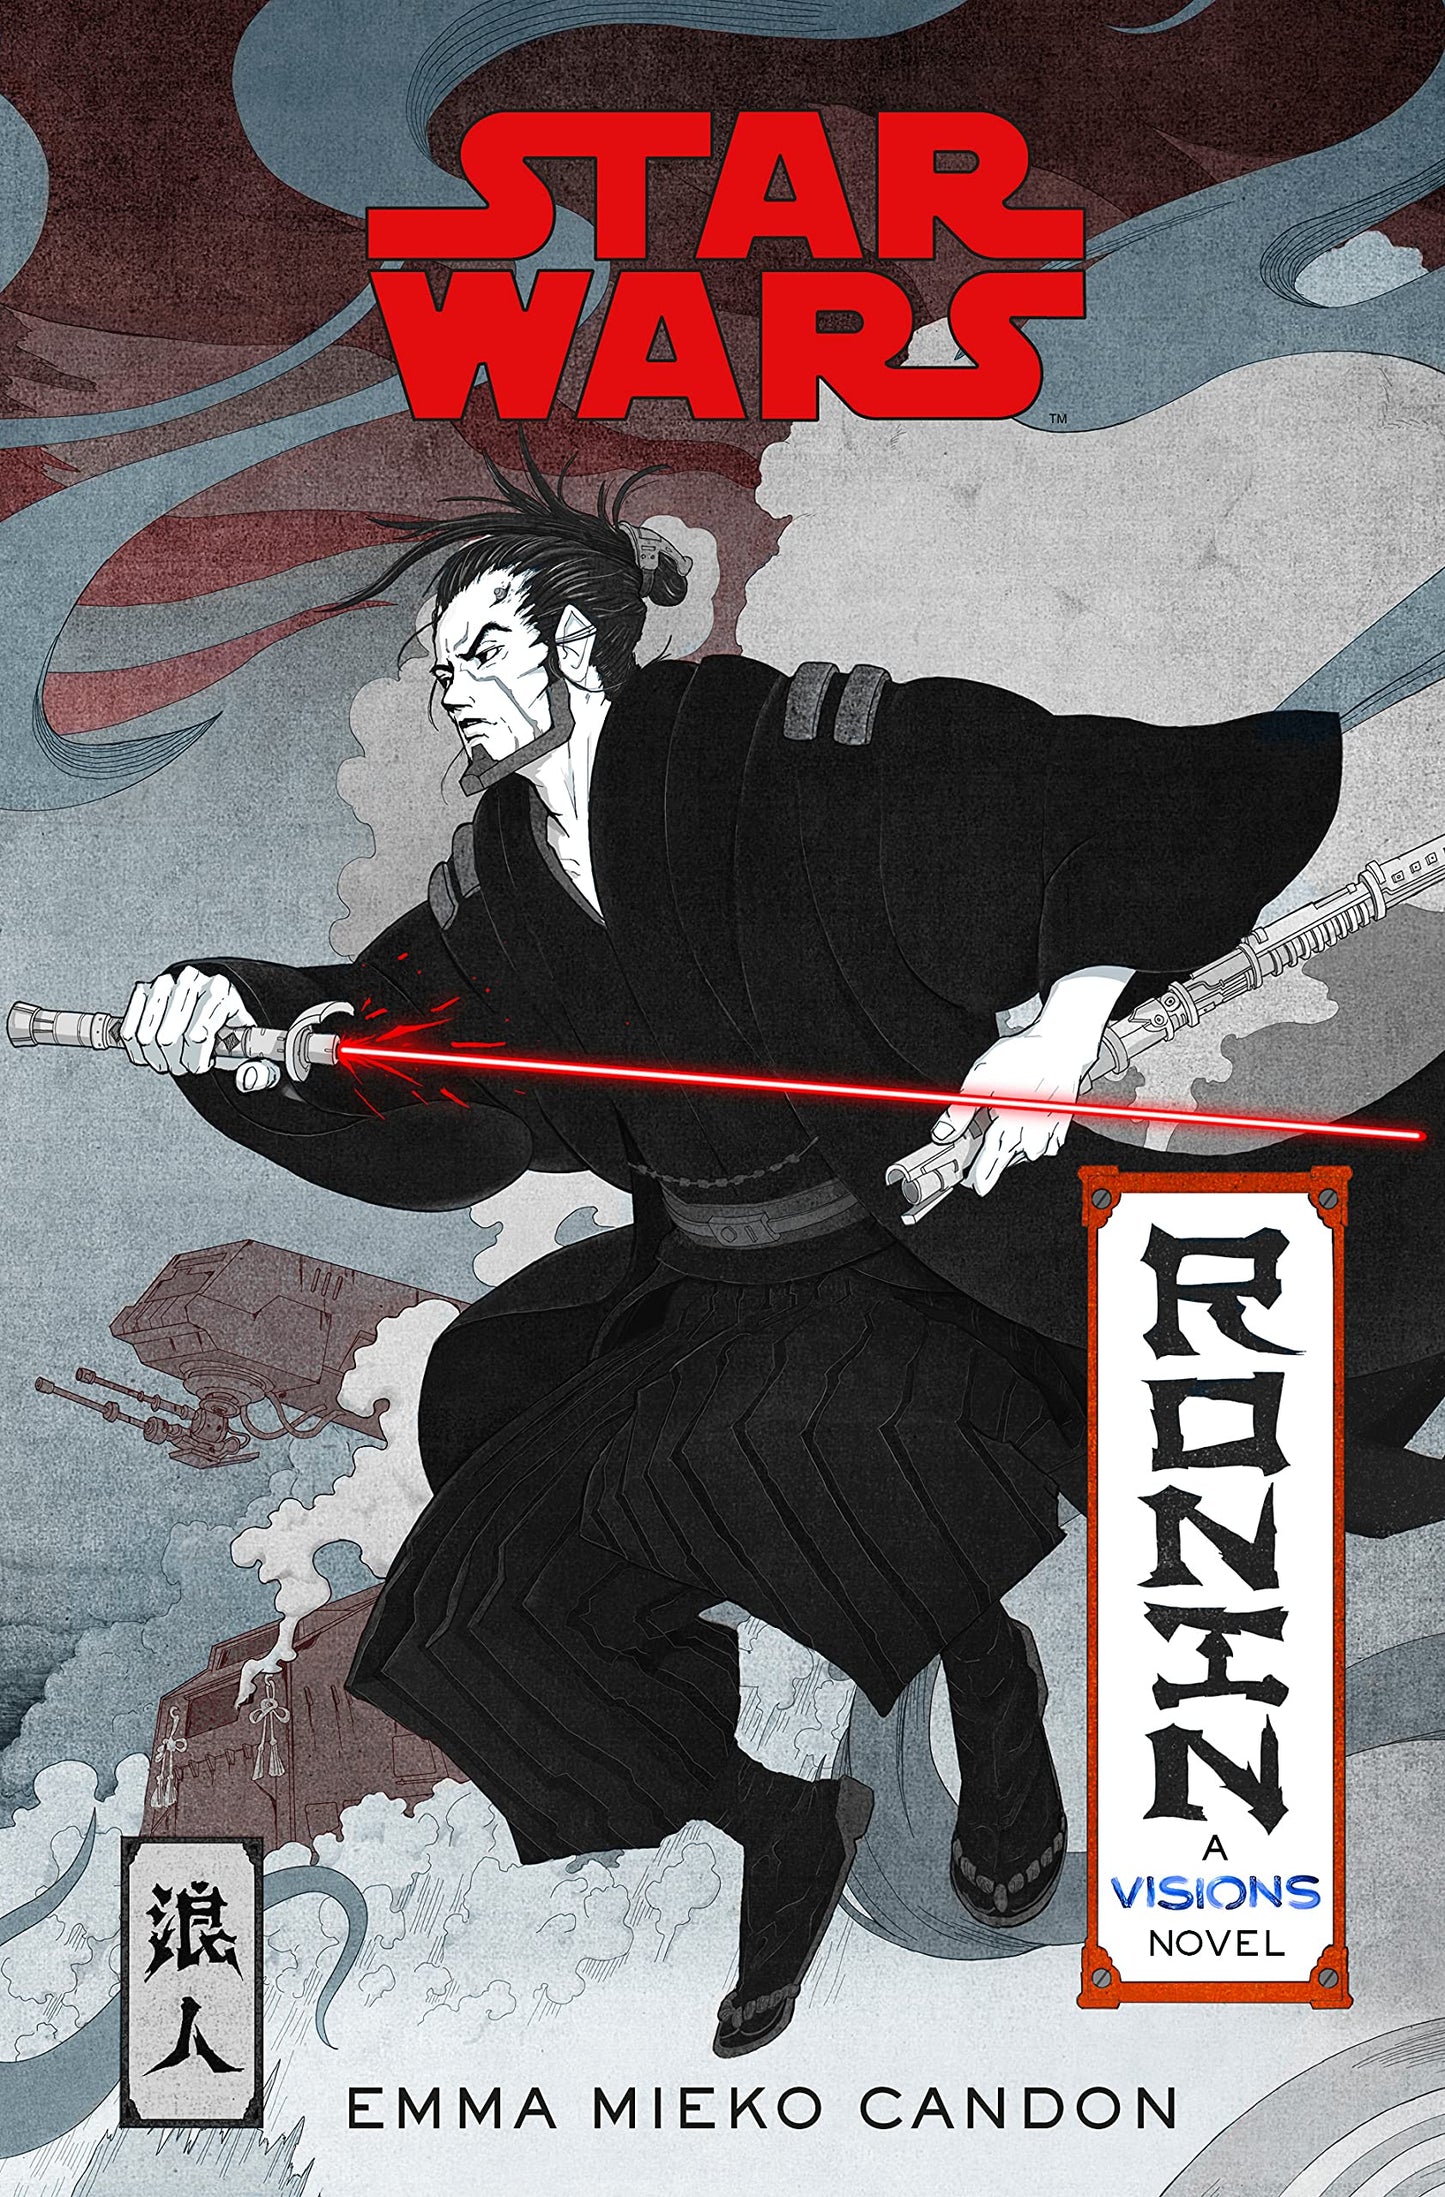 Star Wars Visions: Ronin Hardcover Book